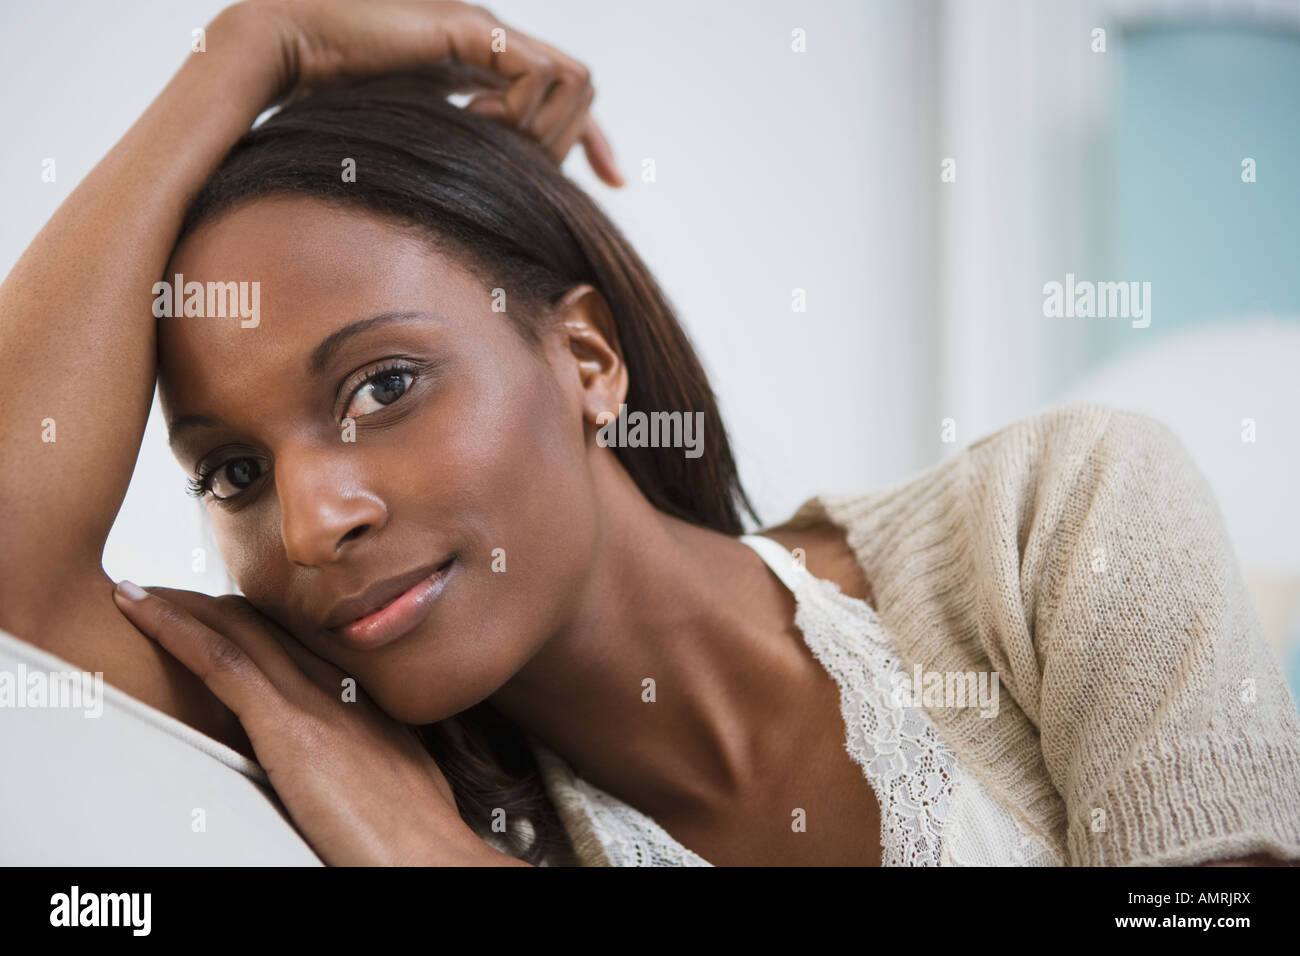 Close up of African woman Stock Photo